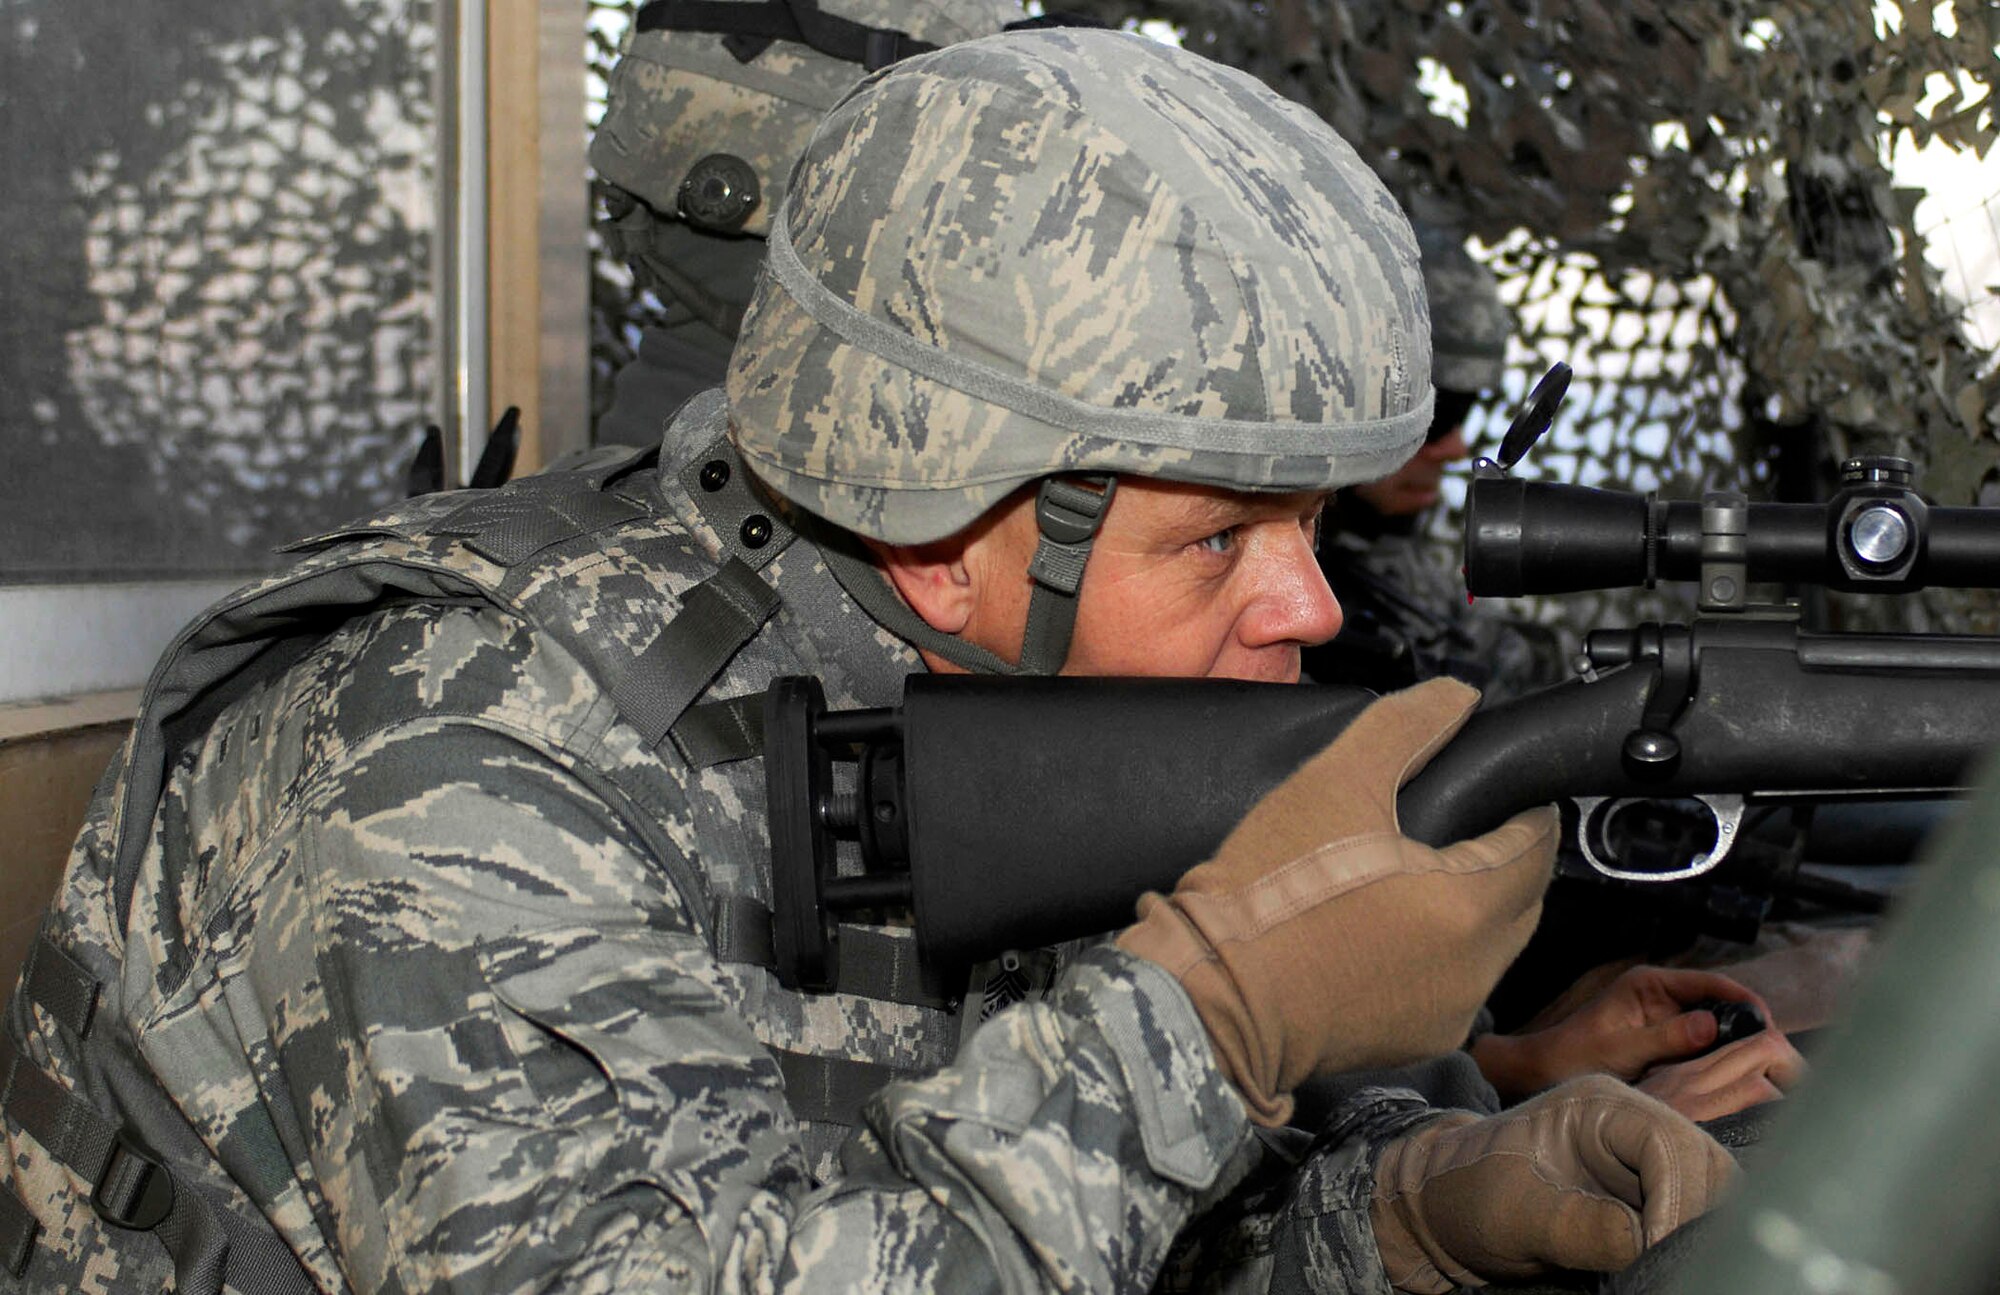 Chief Master Sgt. of the Air Force James A. Roy looks through the scope of an M-24 sniper weapon at one of observation towers Nov. 28, 2009, at Bagram Airfield, Afghanistan. (U.S. Air Force photo/Tech. Sgt. John Jung)